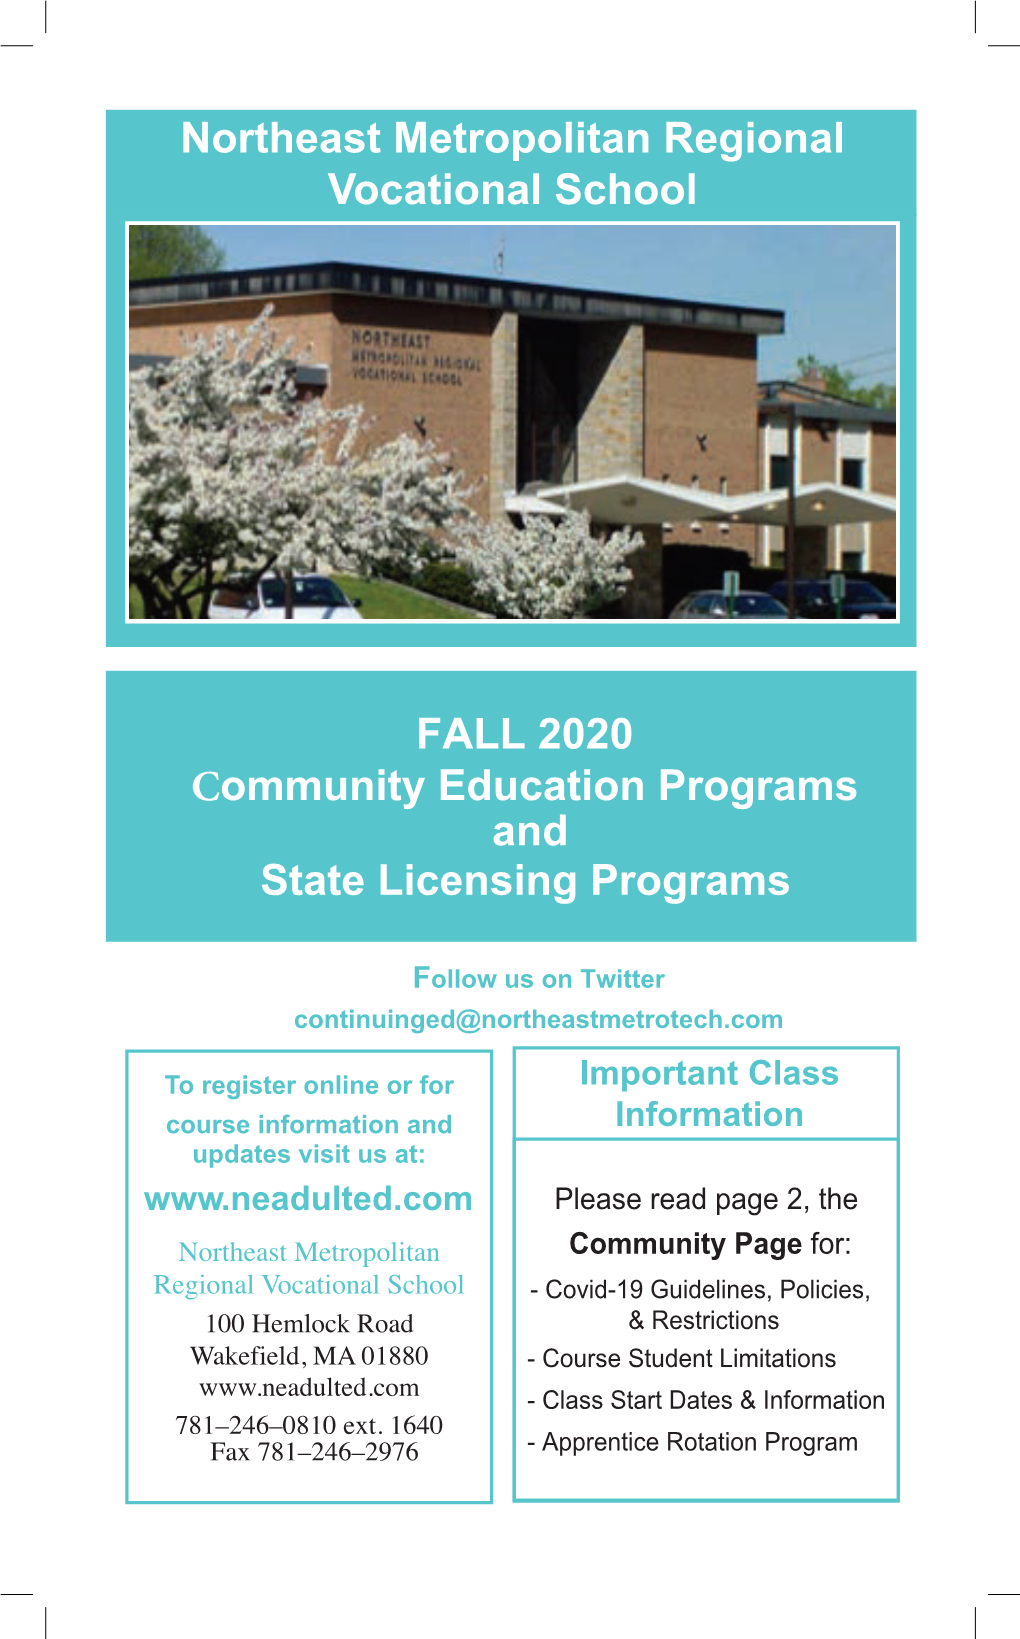 FALL 020 Community Education Programs and State Licensing